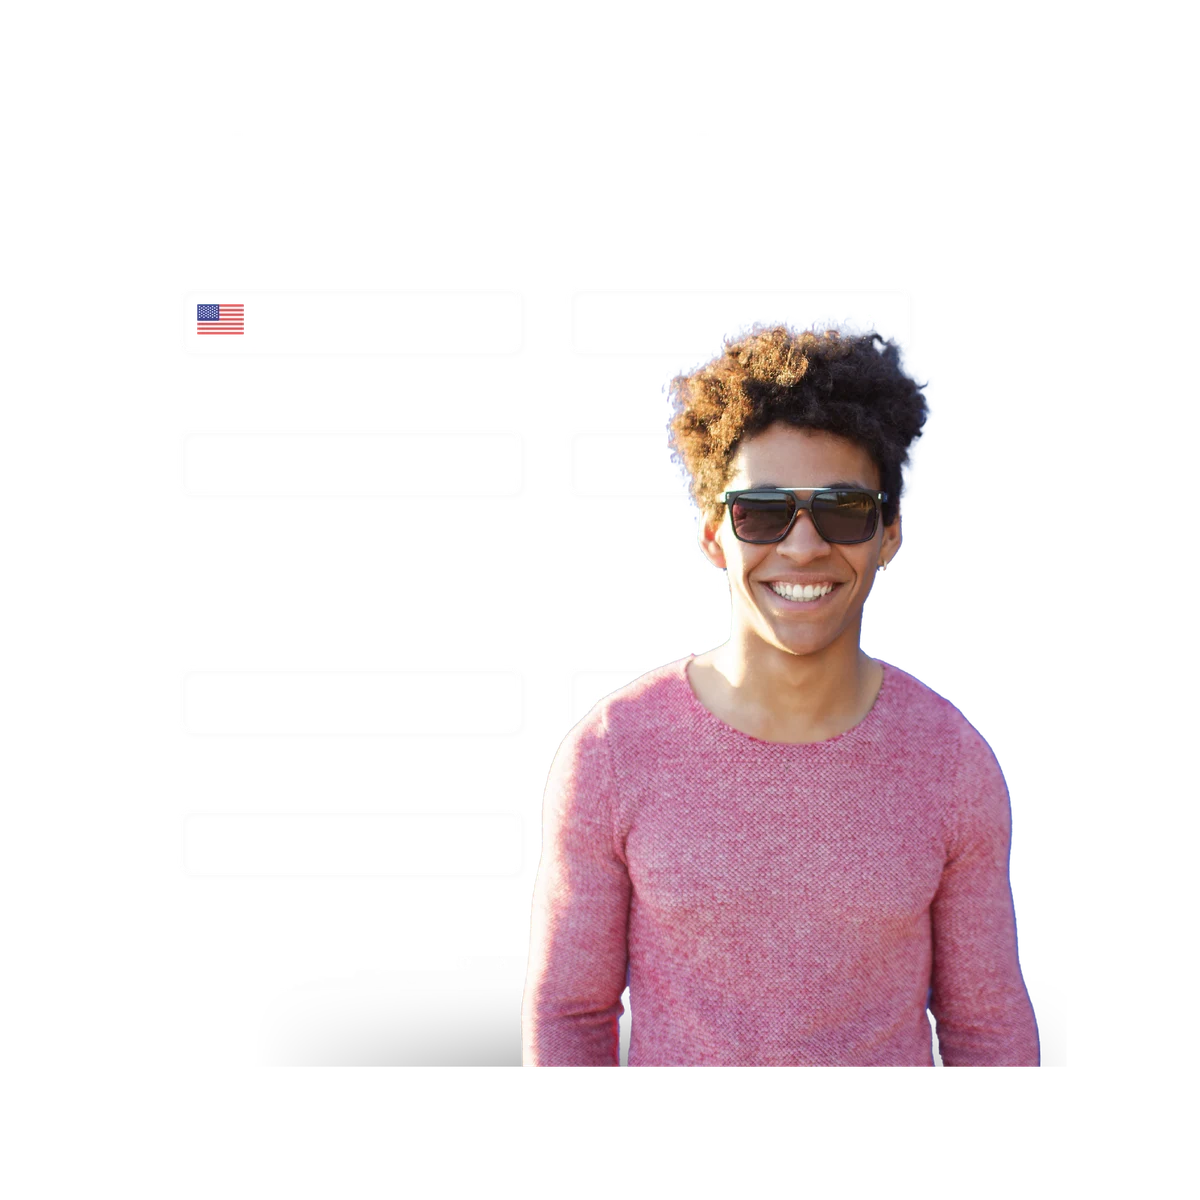 guy in a pink blouse and sunglasses with demographic details in the background